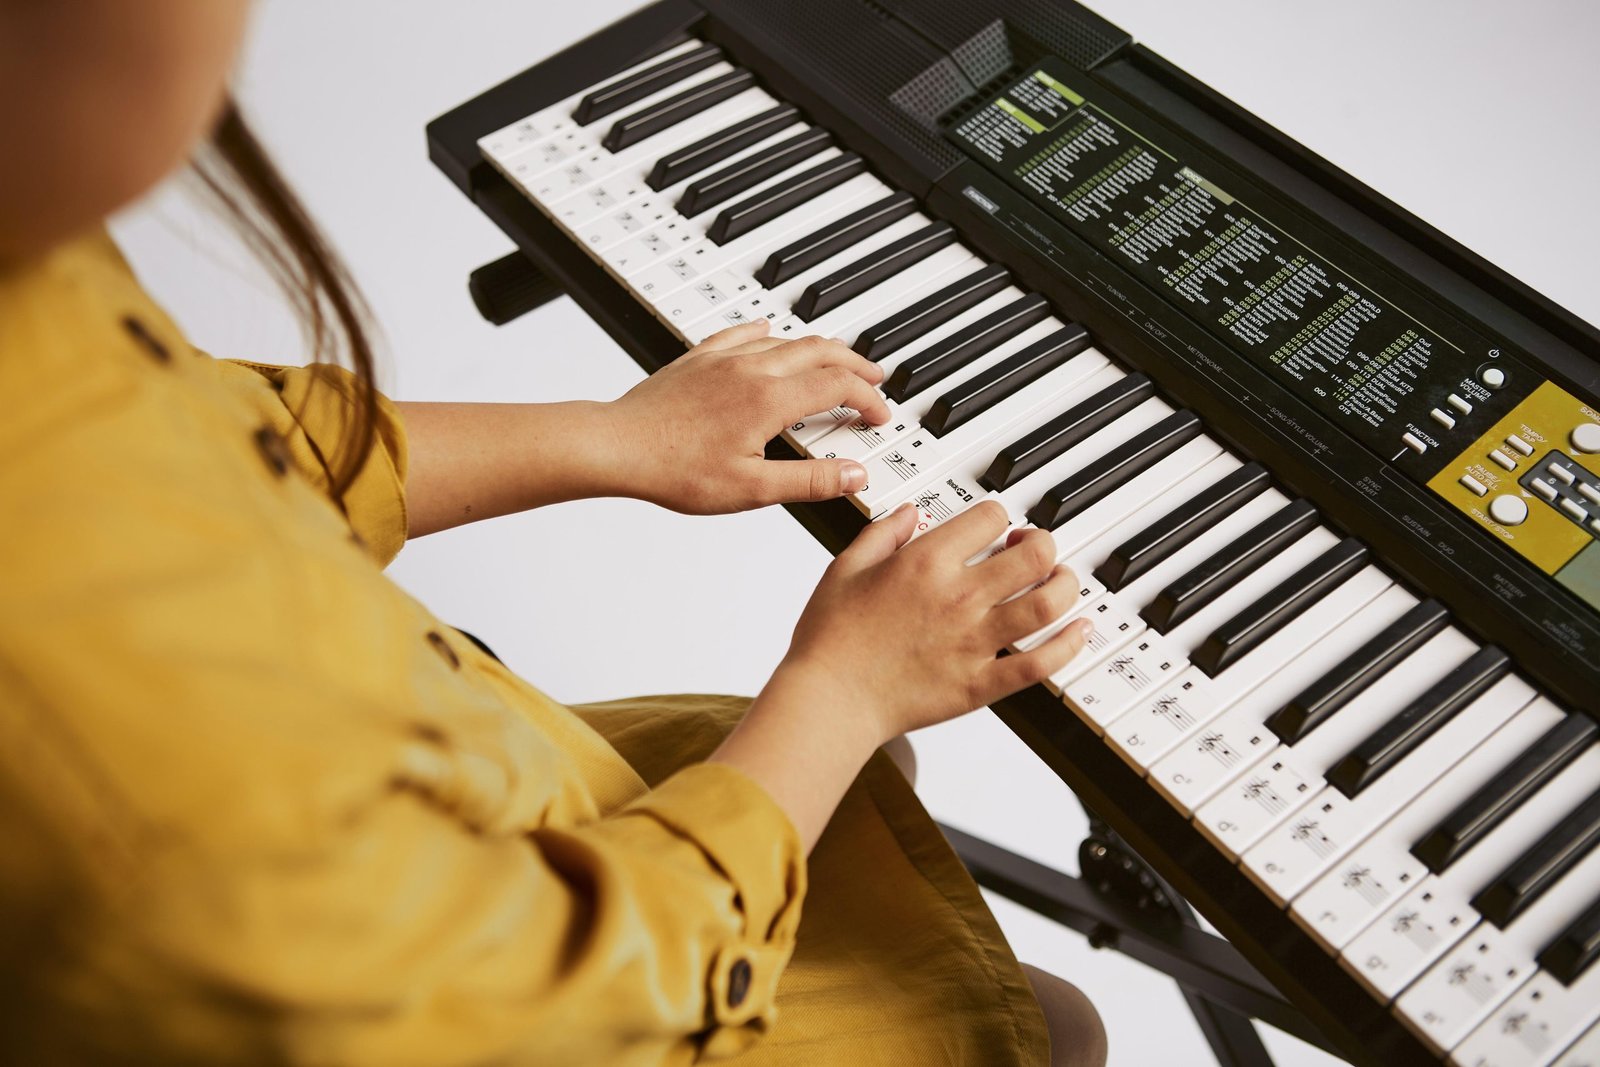 Important Things to Consider When Buying a Digital Piano